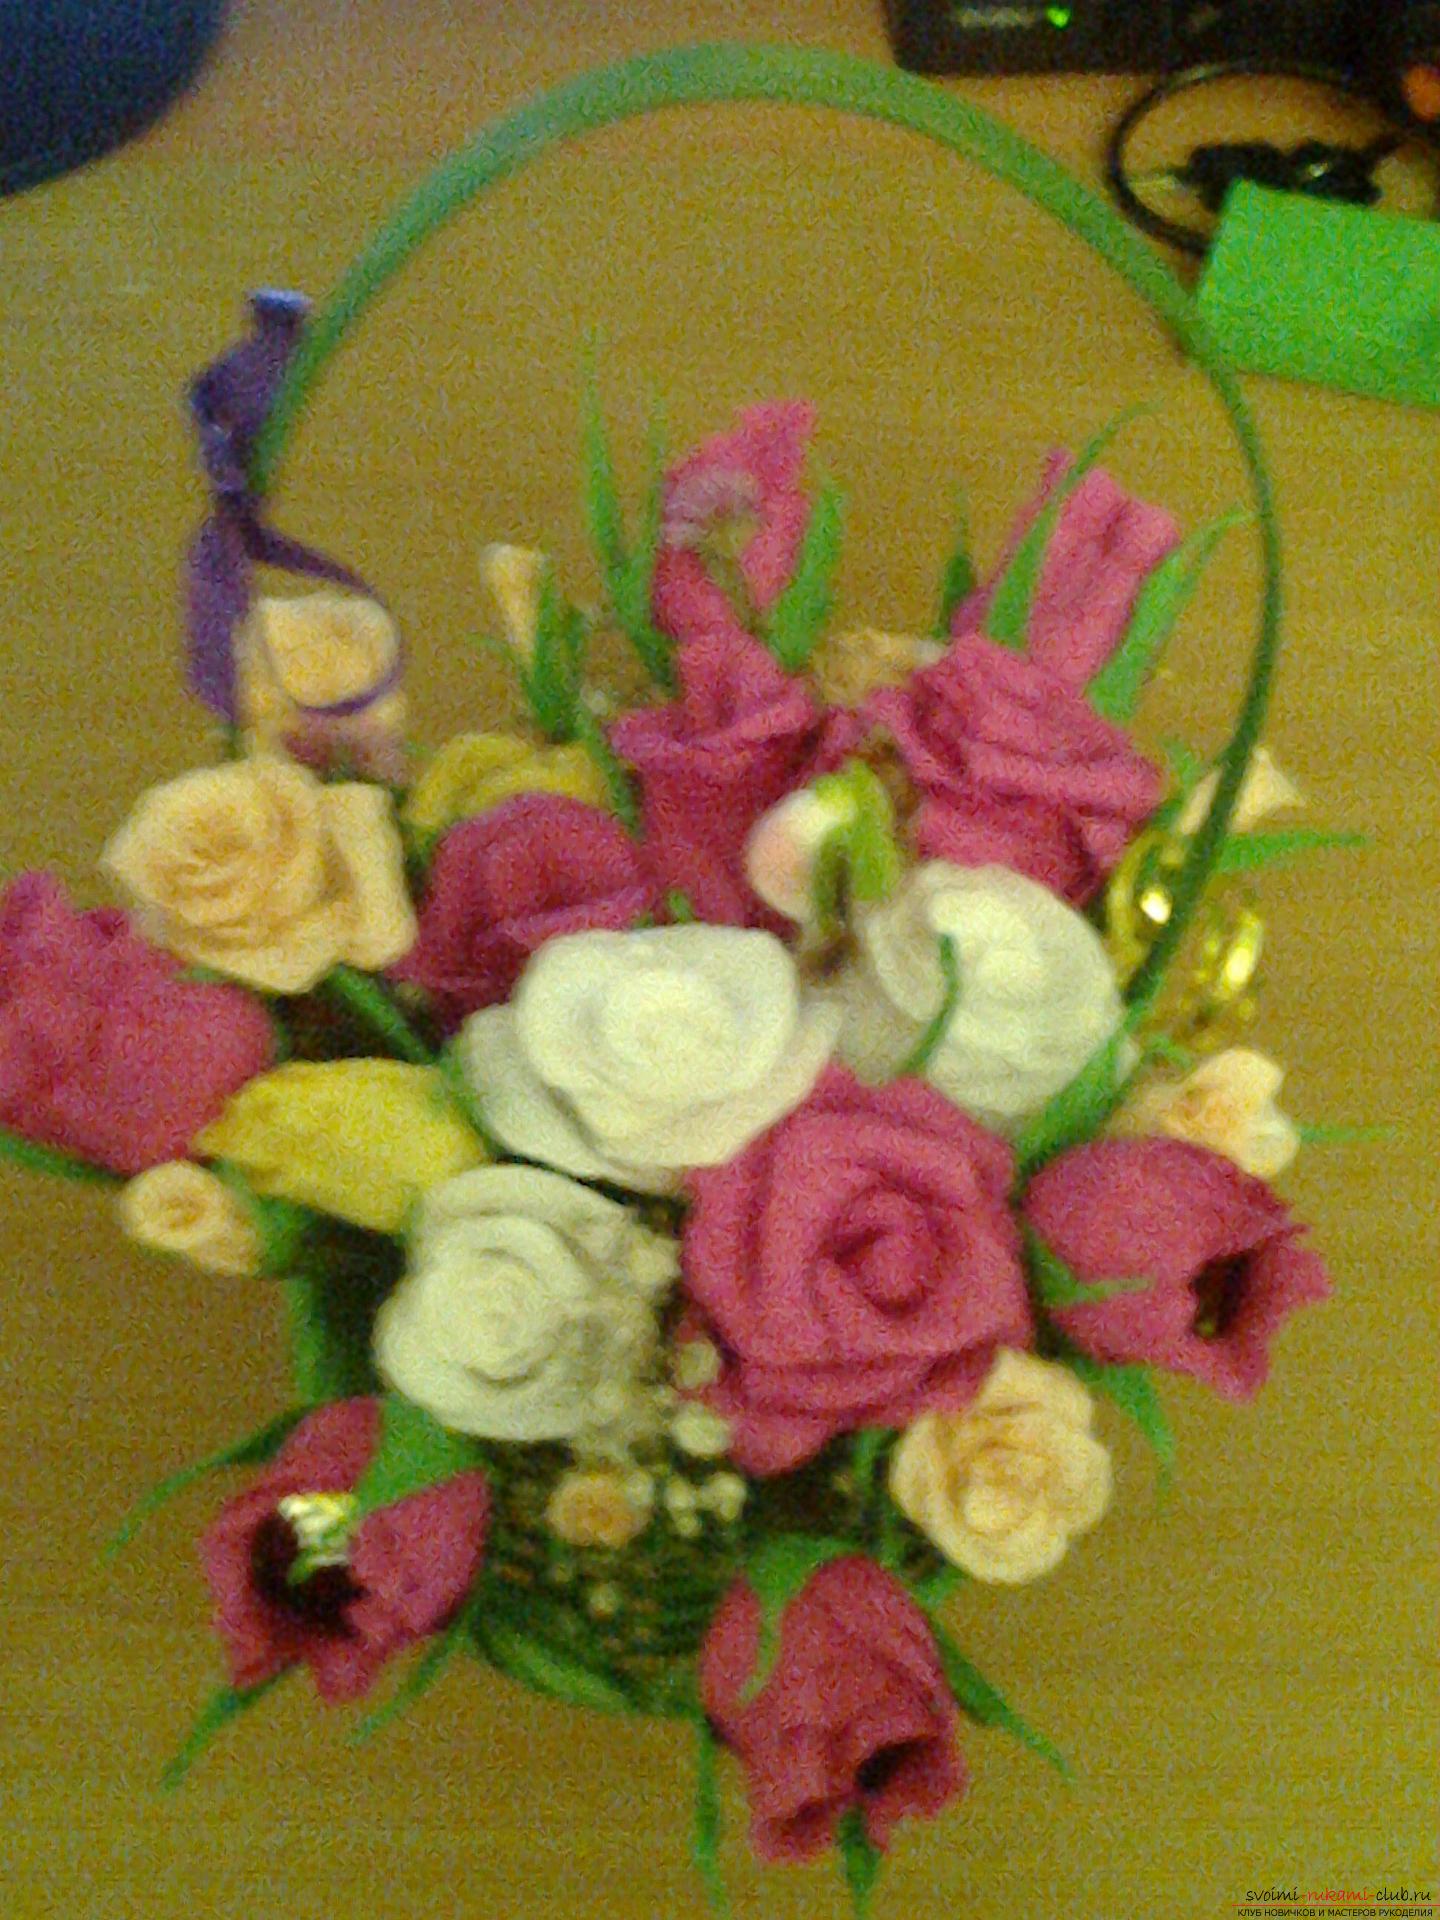 Basket of flowers from sweets as a gift. Photo # 2